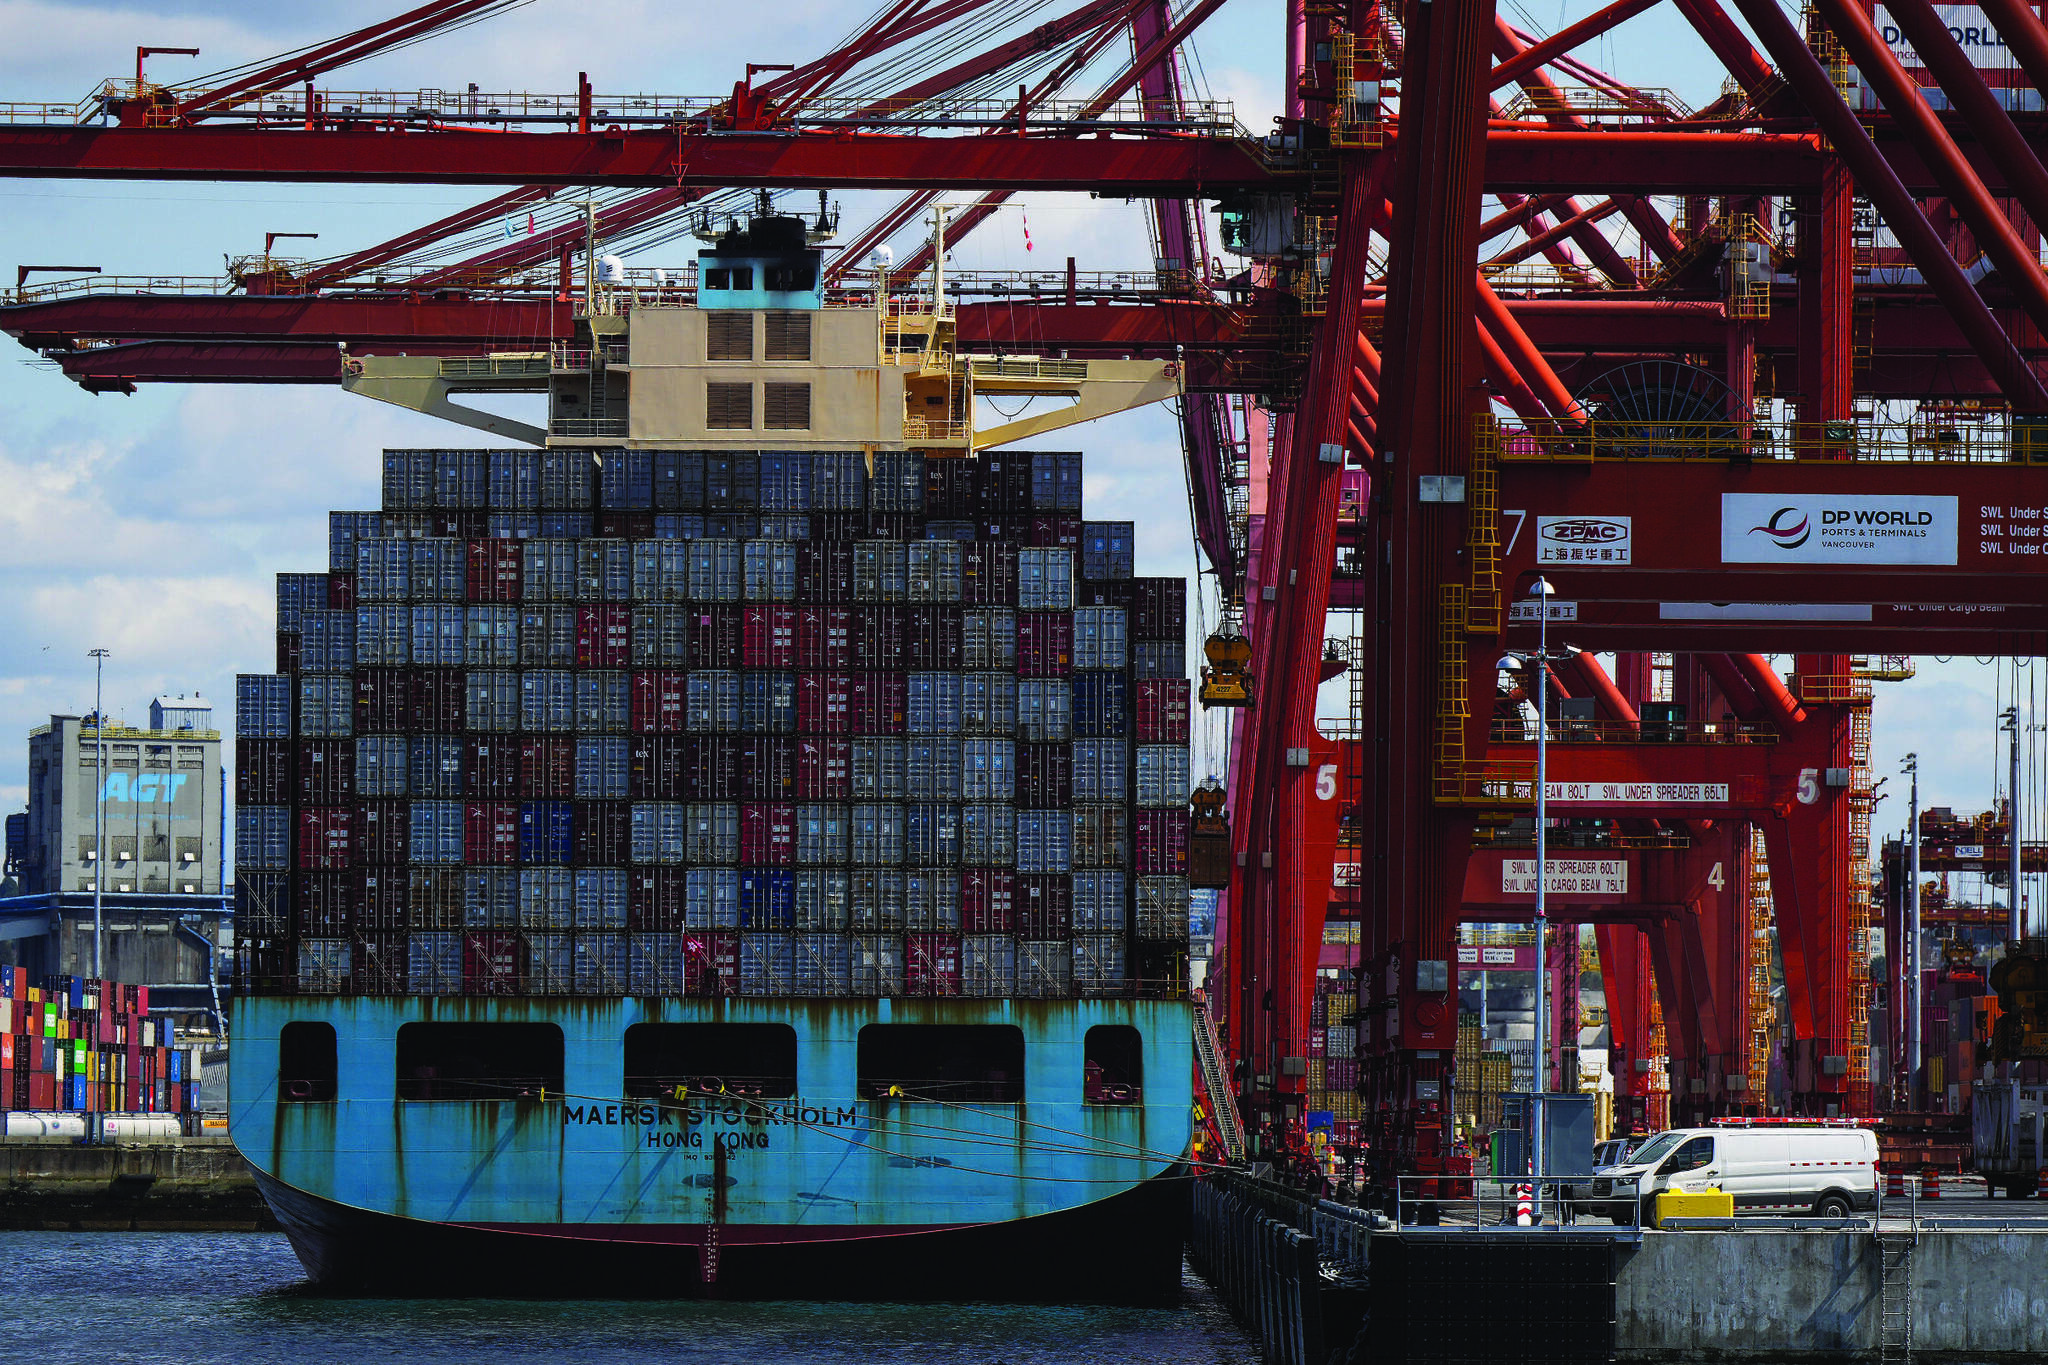 Cargo containers are unloaded from the Maersk Stockholm ship with gantry cranes while docked at port in Vancouver. (Black Press Media File Photo)